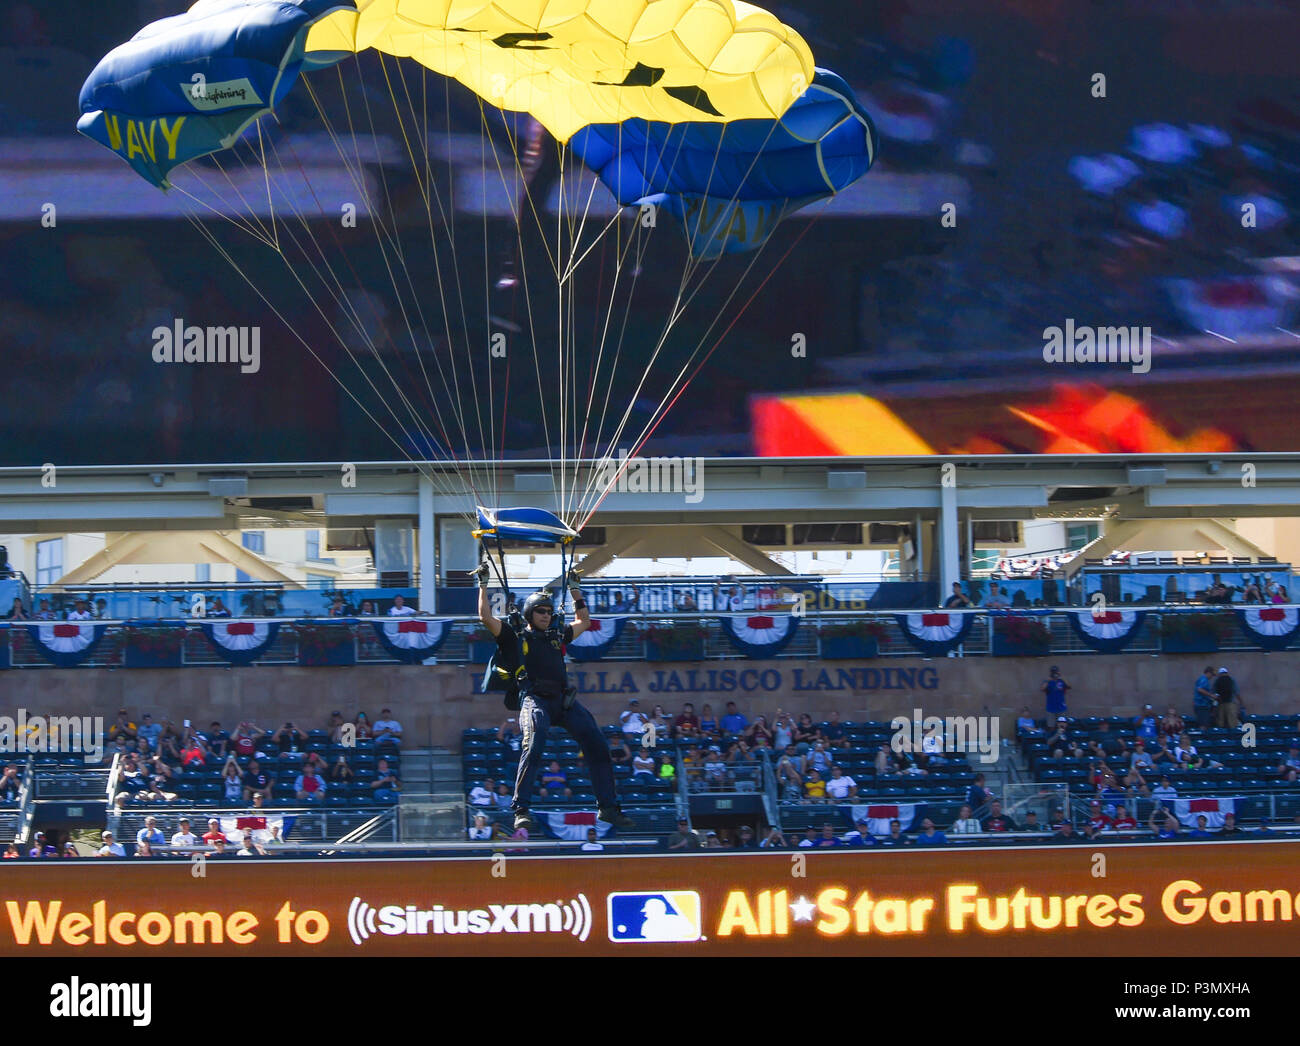 160710-N-VY375-058 SAN DIEGO (July 10, 2016) – Aircrew Survival Equipmentman 1st Class Victor Maldonado, member of the U.S. Navy Parachute Team, the Leap Frogs, prepares to land during a demonstration at the Major League Baseball All-Star Futures Game above Petco Park. The Navy Parachute Team is based in San Diego and performs aerial parachute demonstrations around the nation in support of Naval Special Warfare and Navy recruiting. (U.S. Navy photo by Special Operator 1st Class Remington Peters/Released) Stock Photo